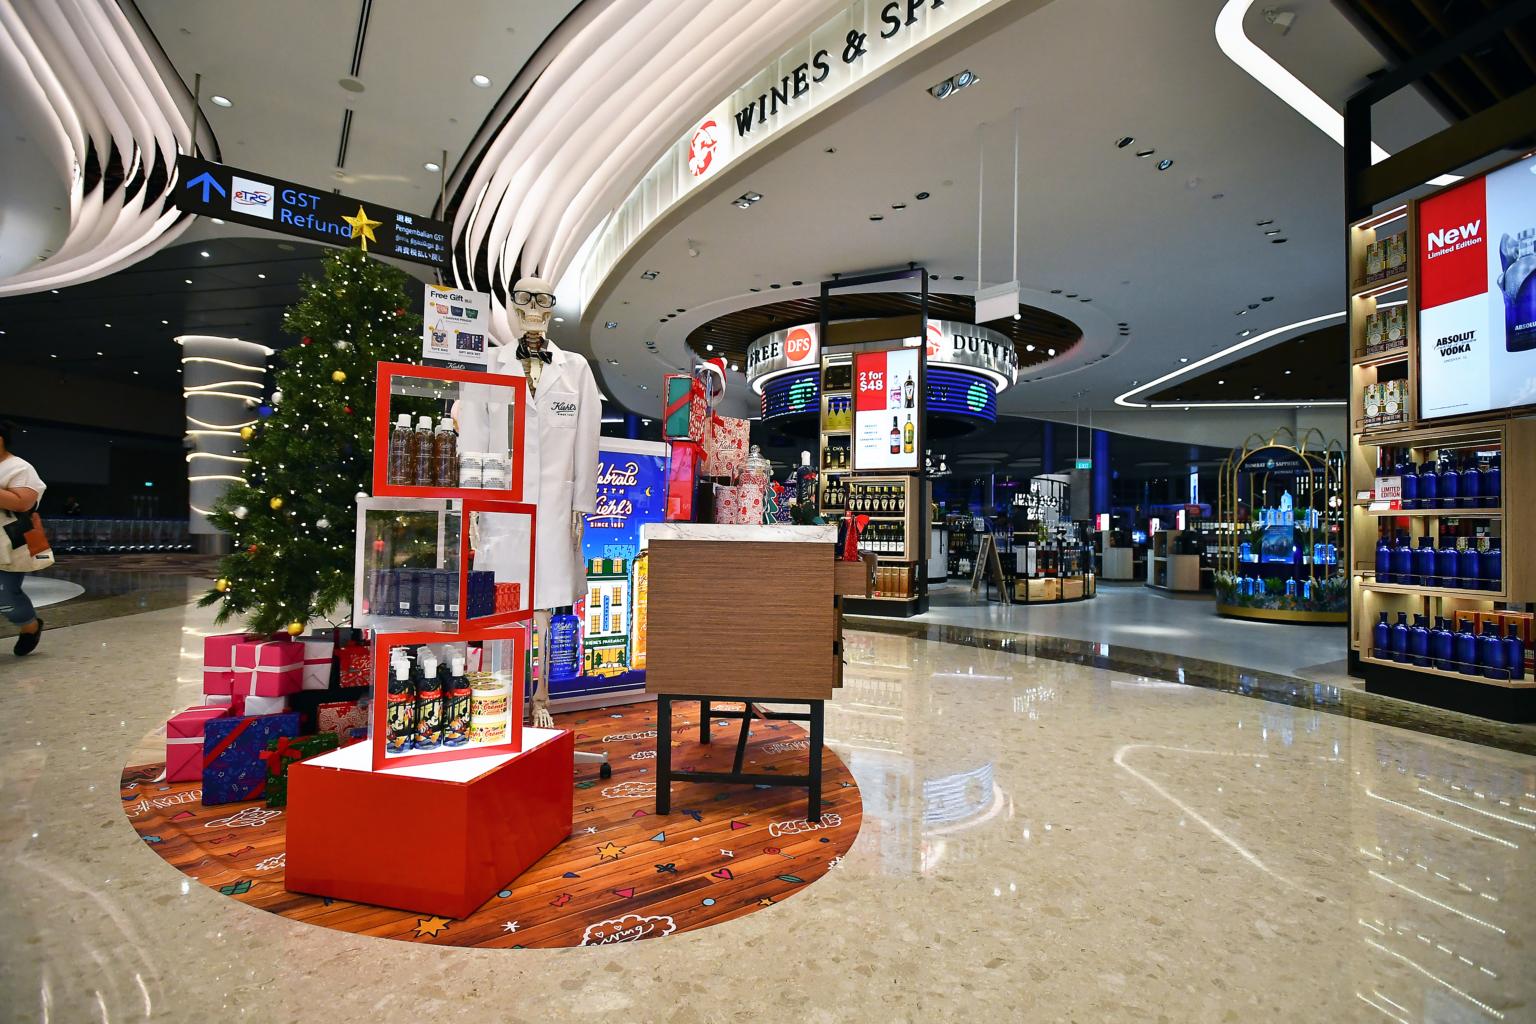 Lotte Duty Free wins tender to replace DFS Group at Changi